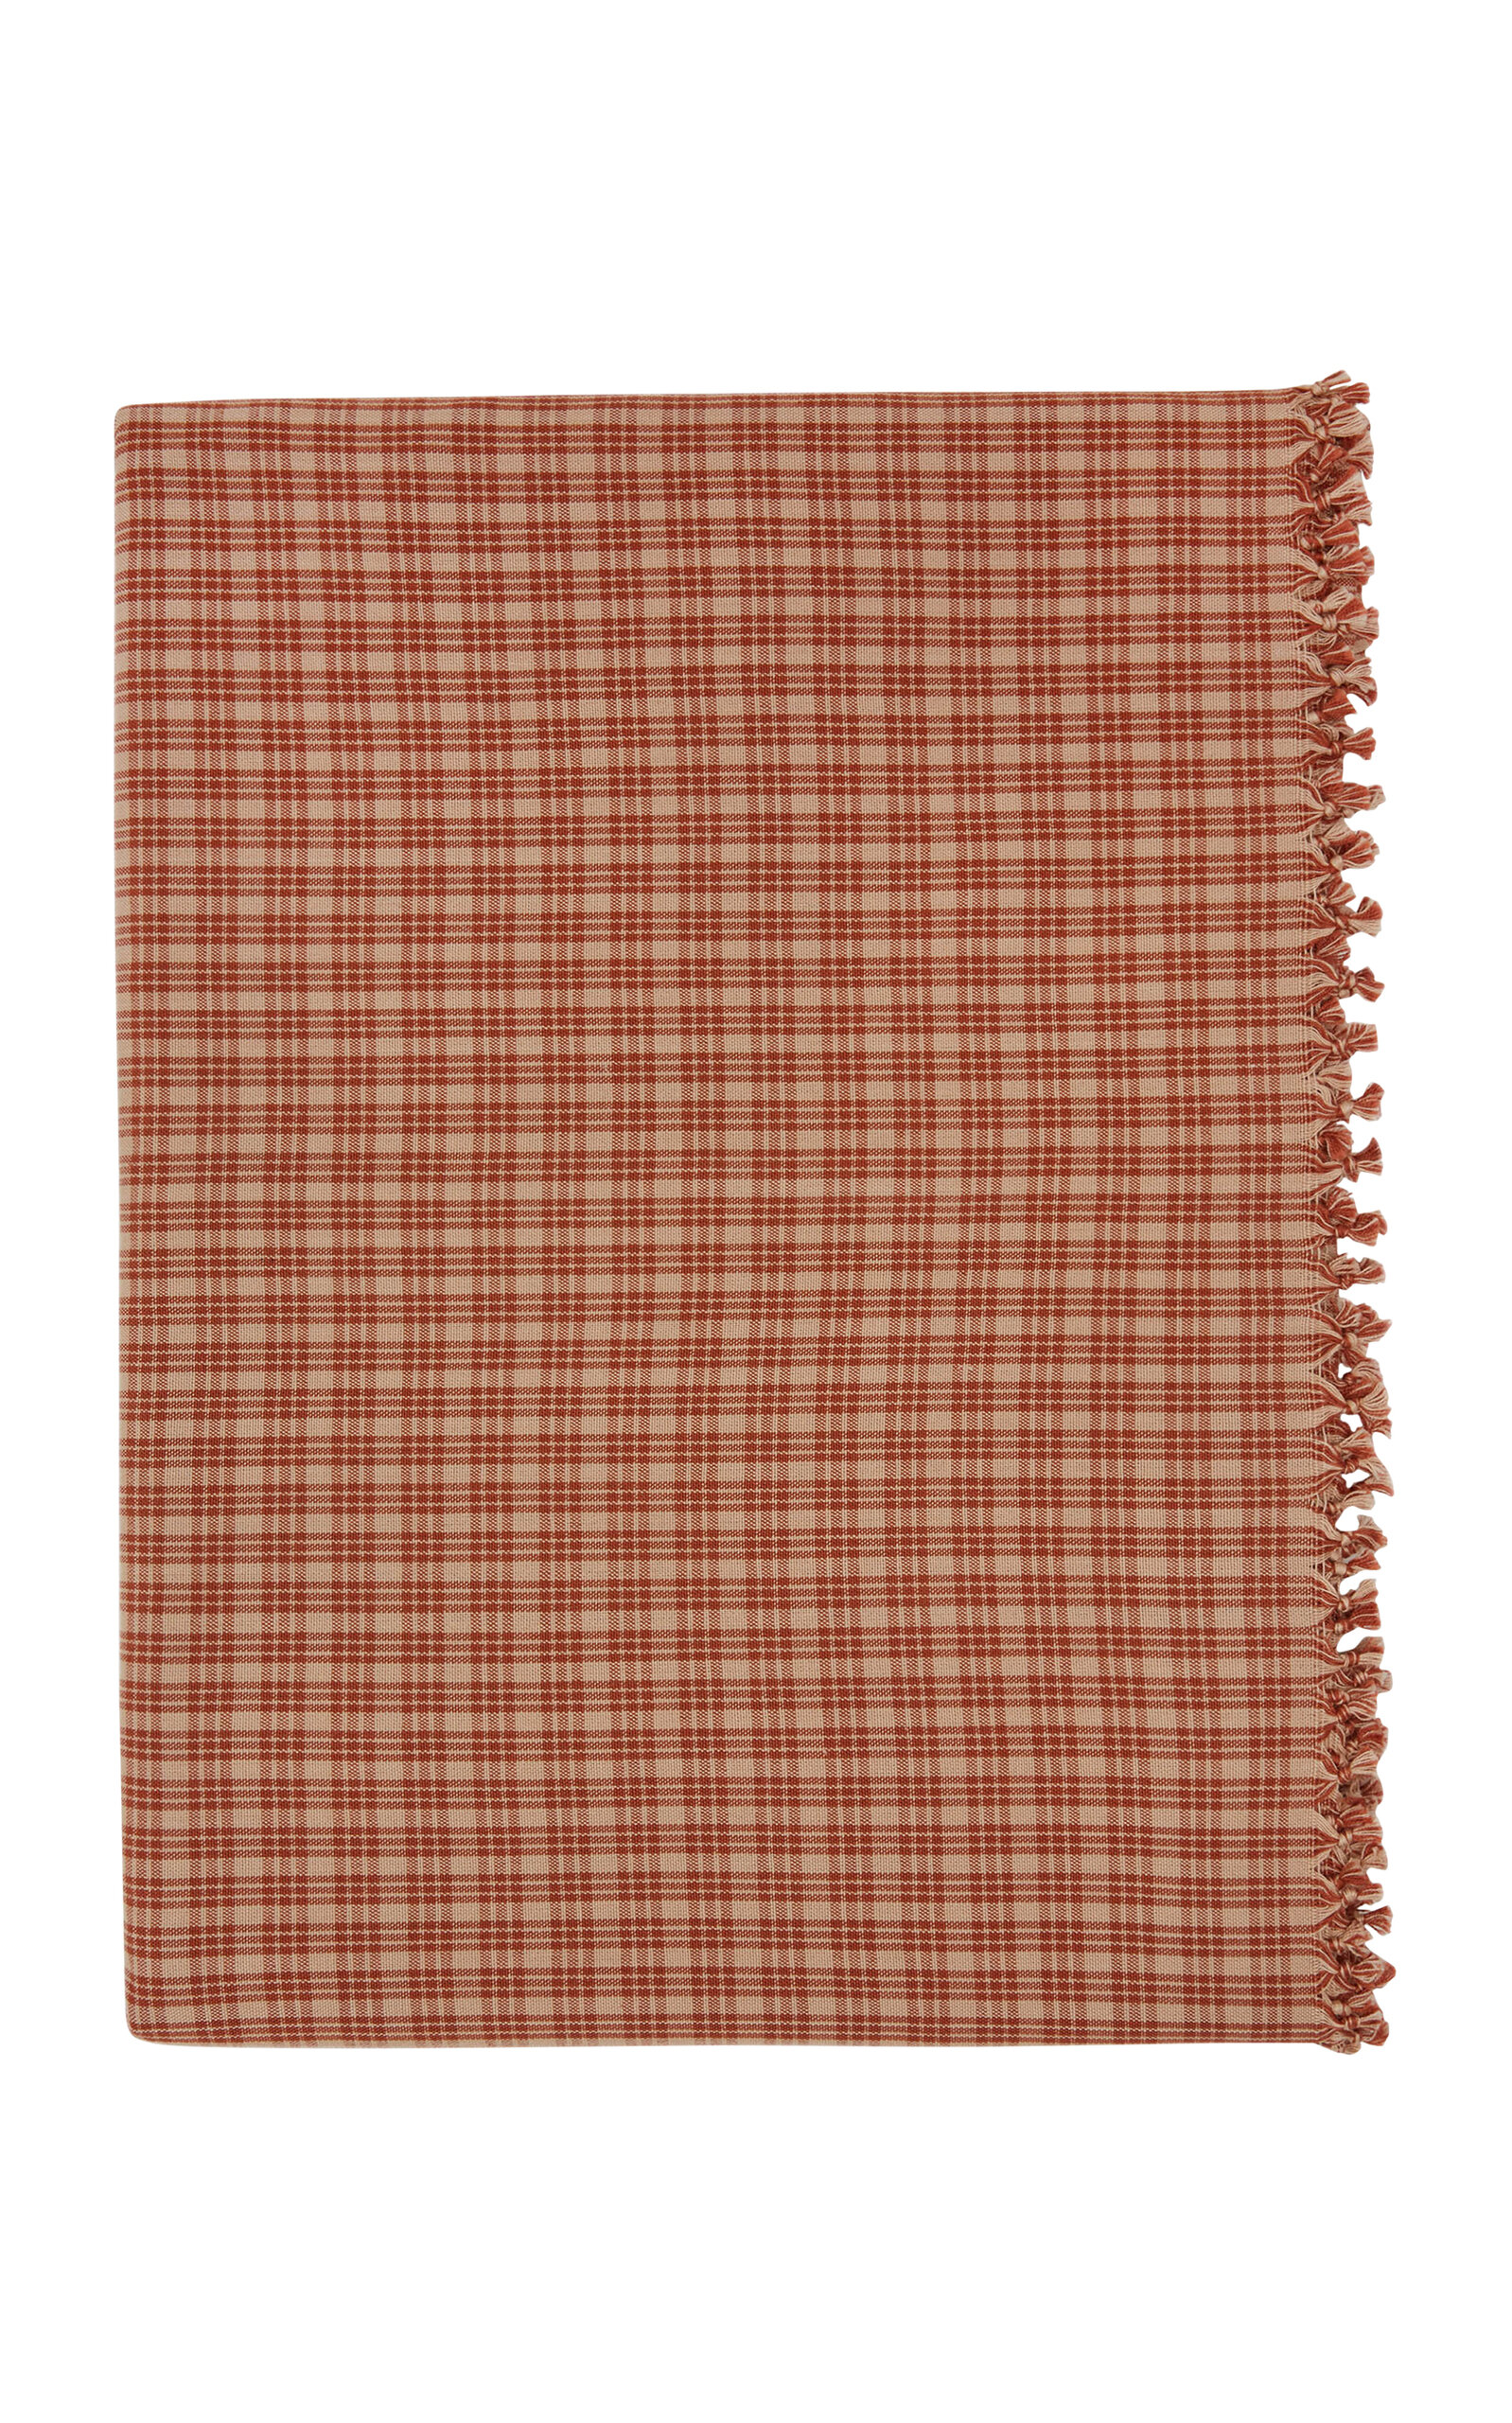 Heather Taylor Home Katherine Plaid Sienna Tablecloth Small In Brown